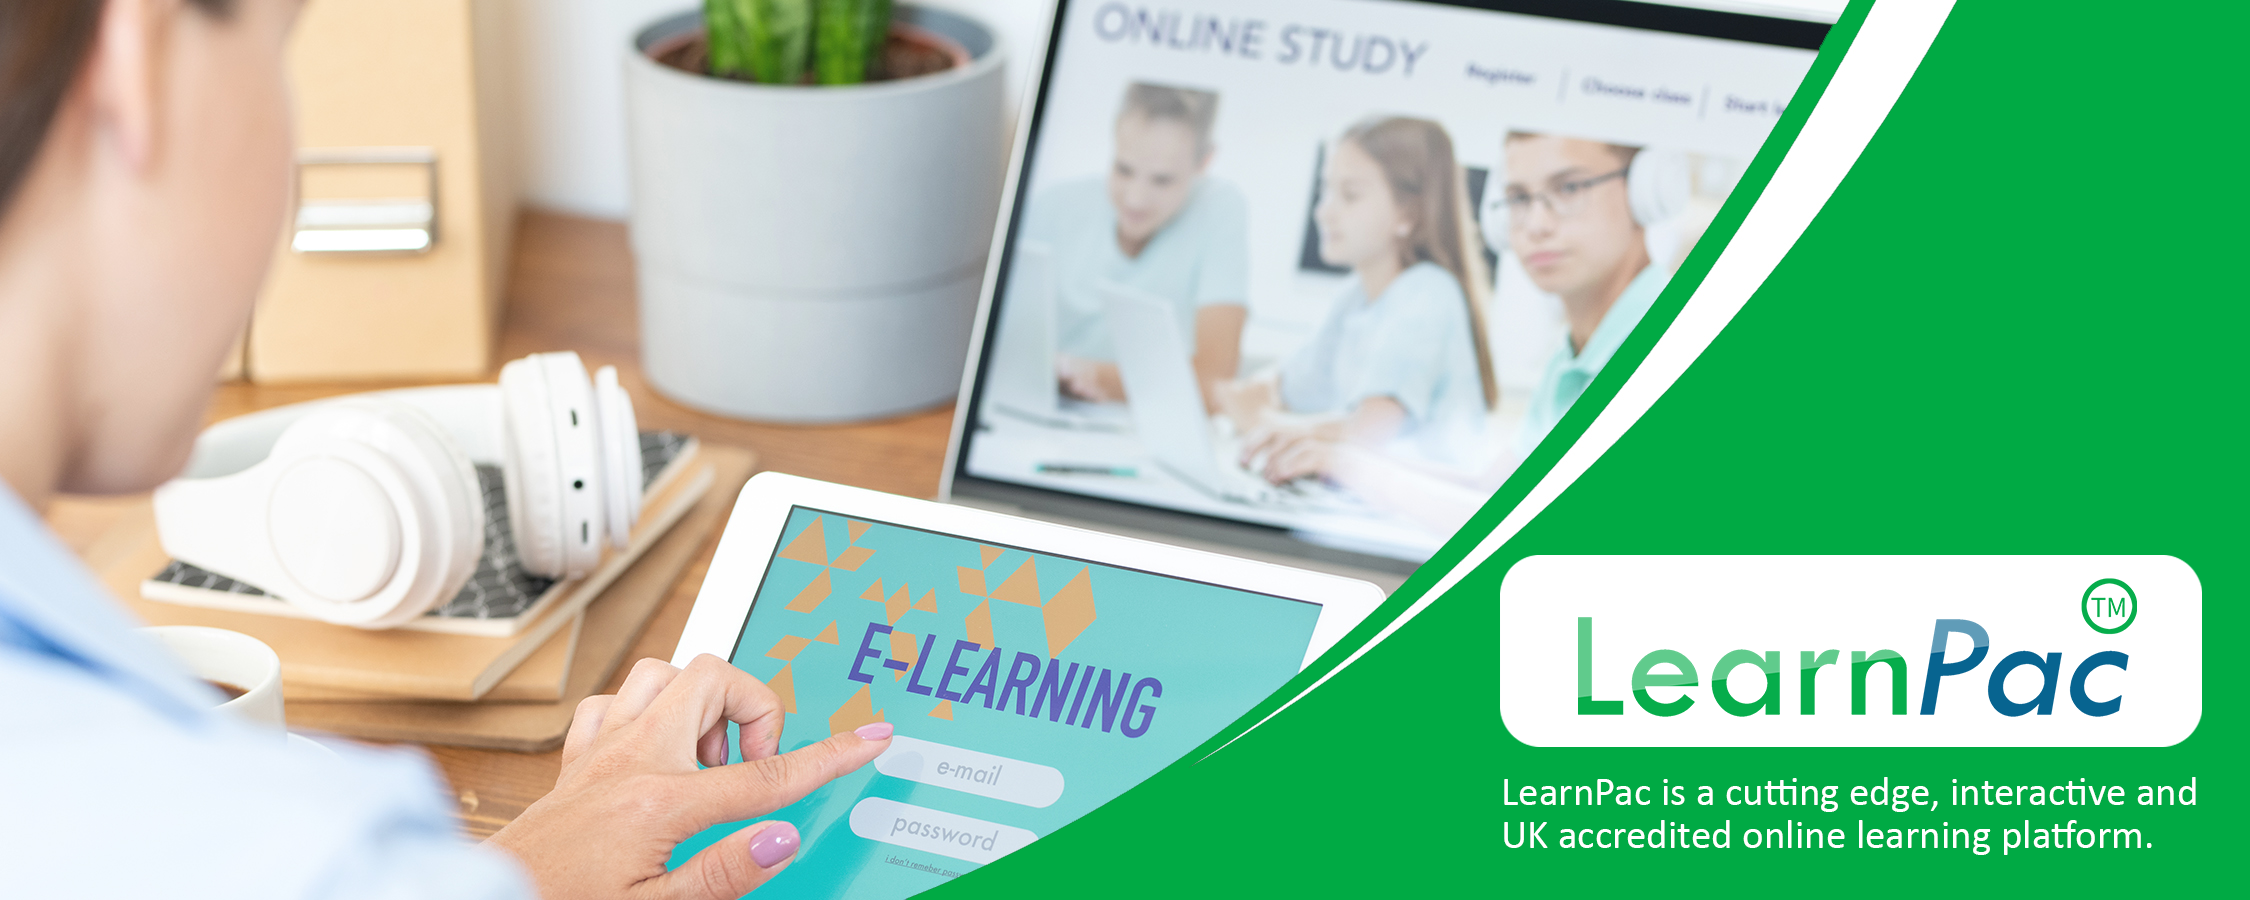 Risk Assessment in the Early Years - Level 2 - Online Learning Courses - E-Learning Courses - LearnPac Systems UK -